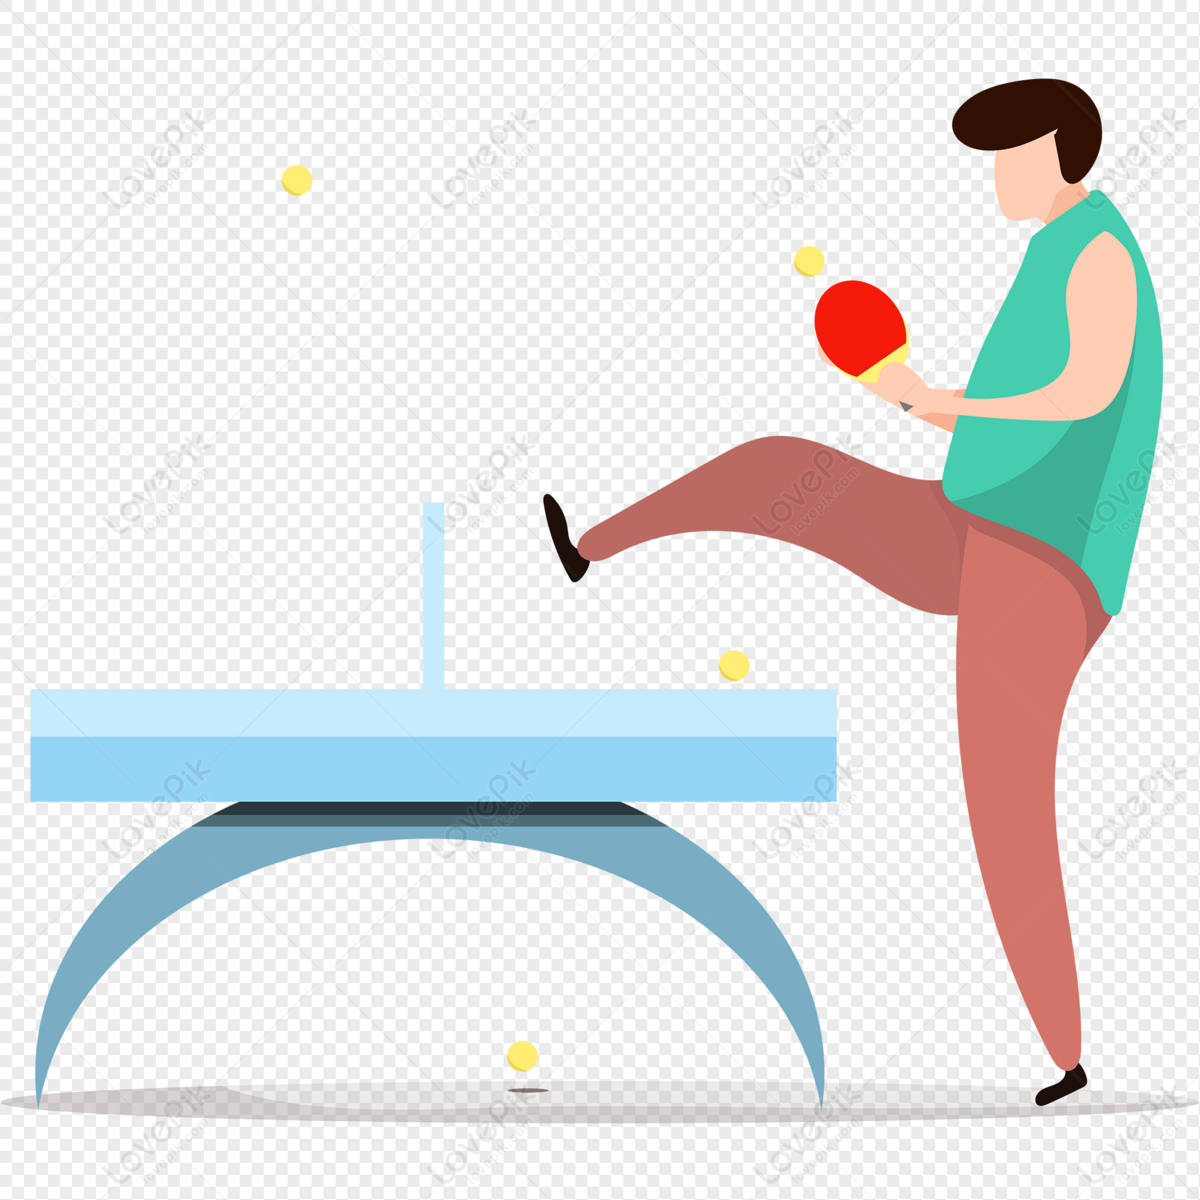 Table Tennis Match PNG Picture And Clipart Image For Free Download ...